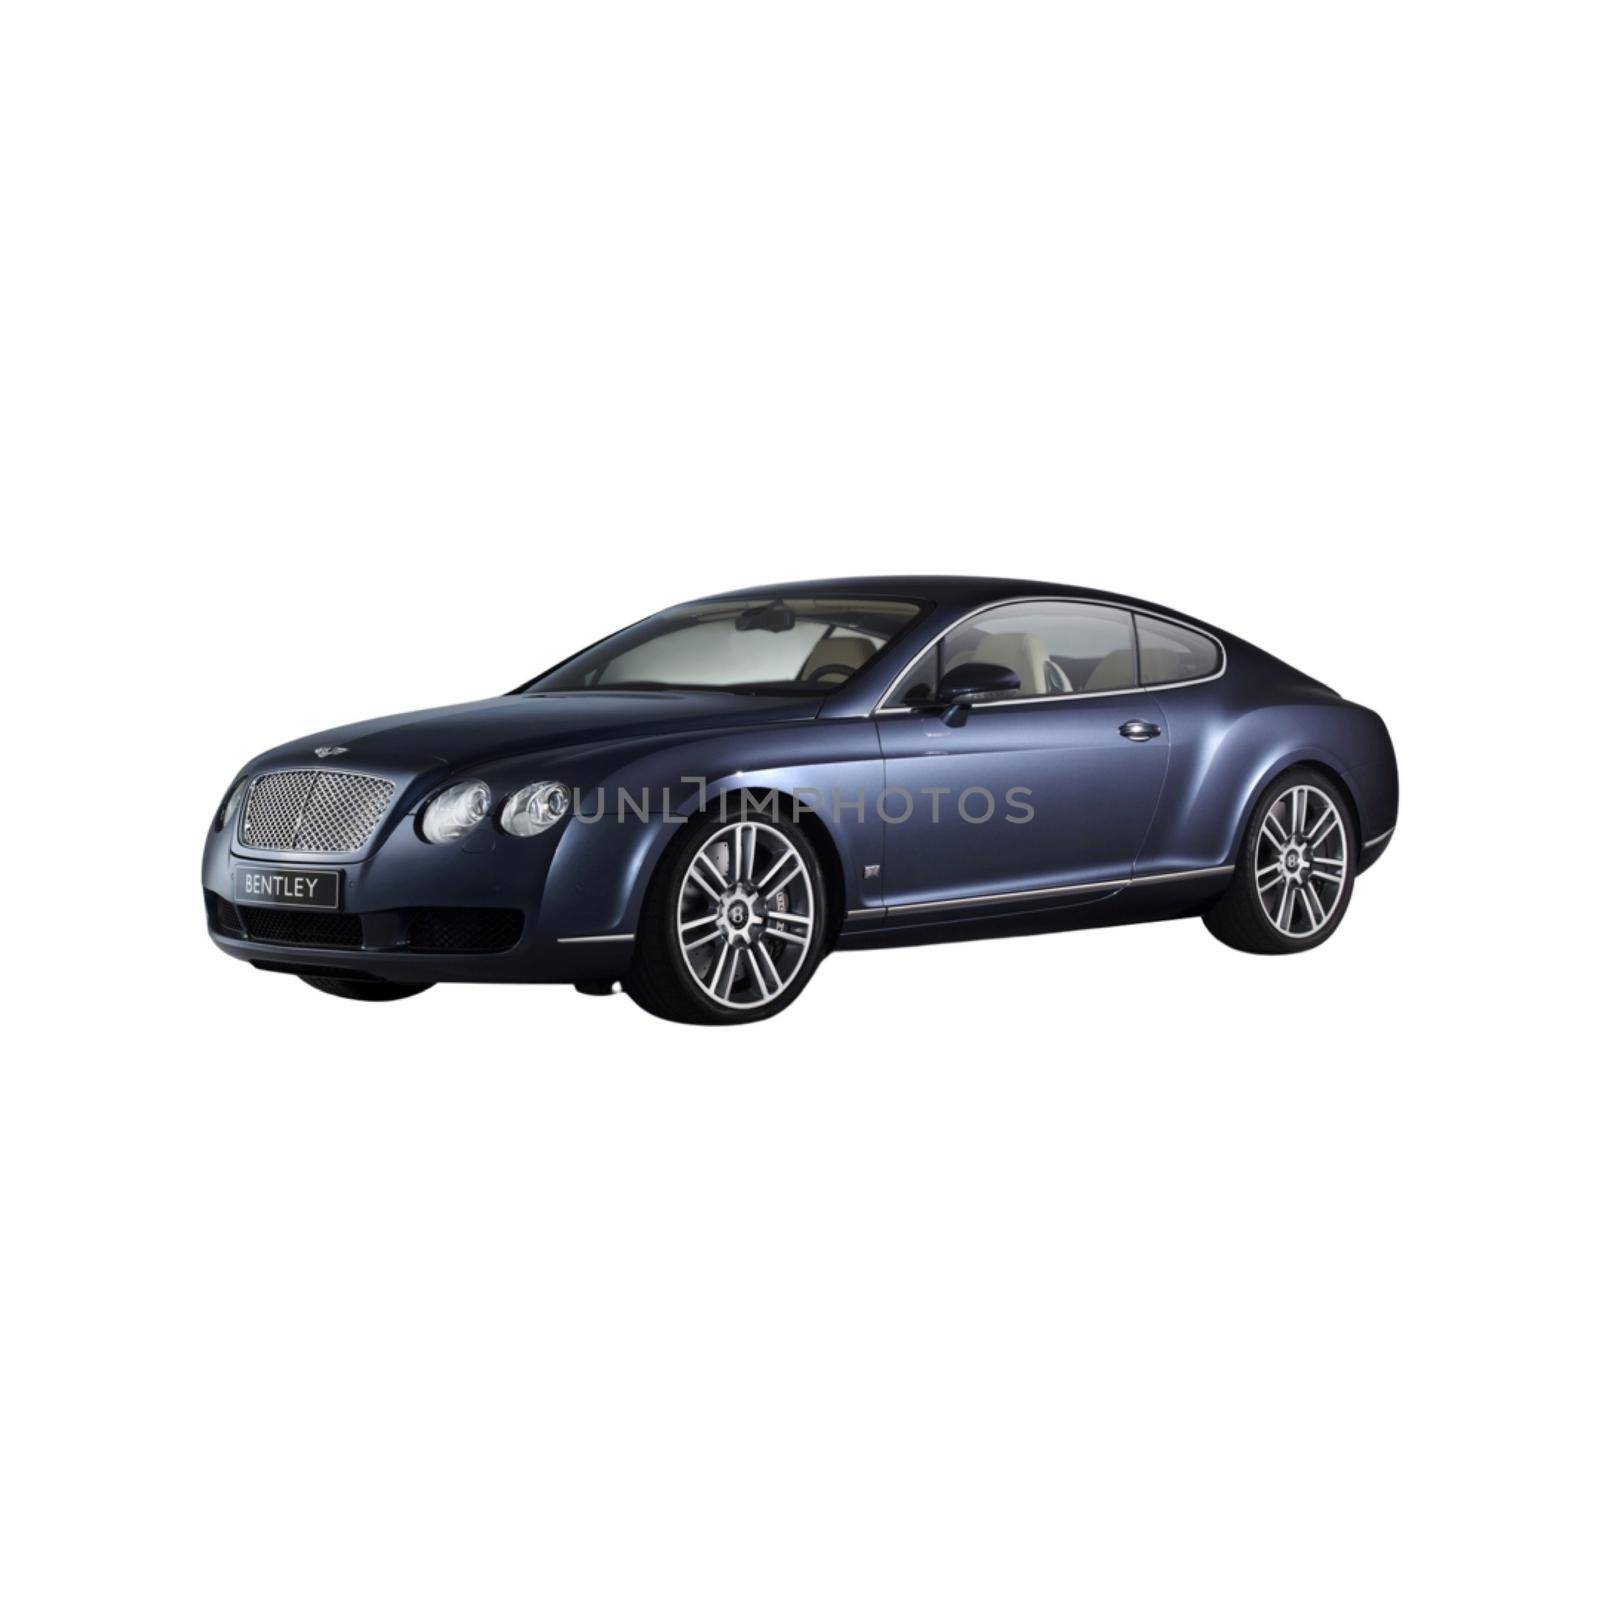 Isolated Picture of a Bentley Continental GT by FlyingDoctor